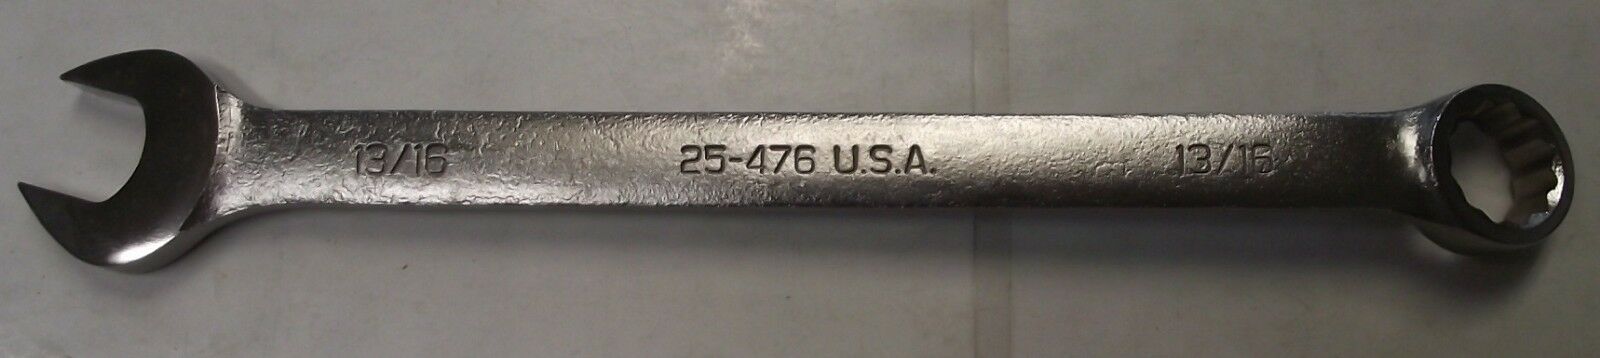 Armstrong 25-476 12 Point 13/16" Combination Wrench USA